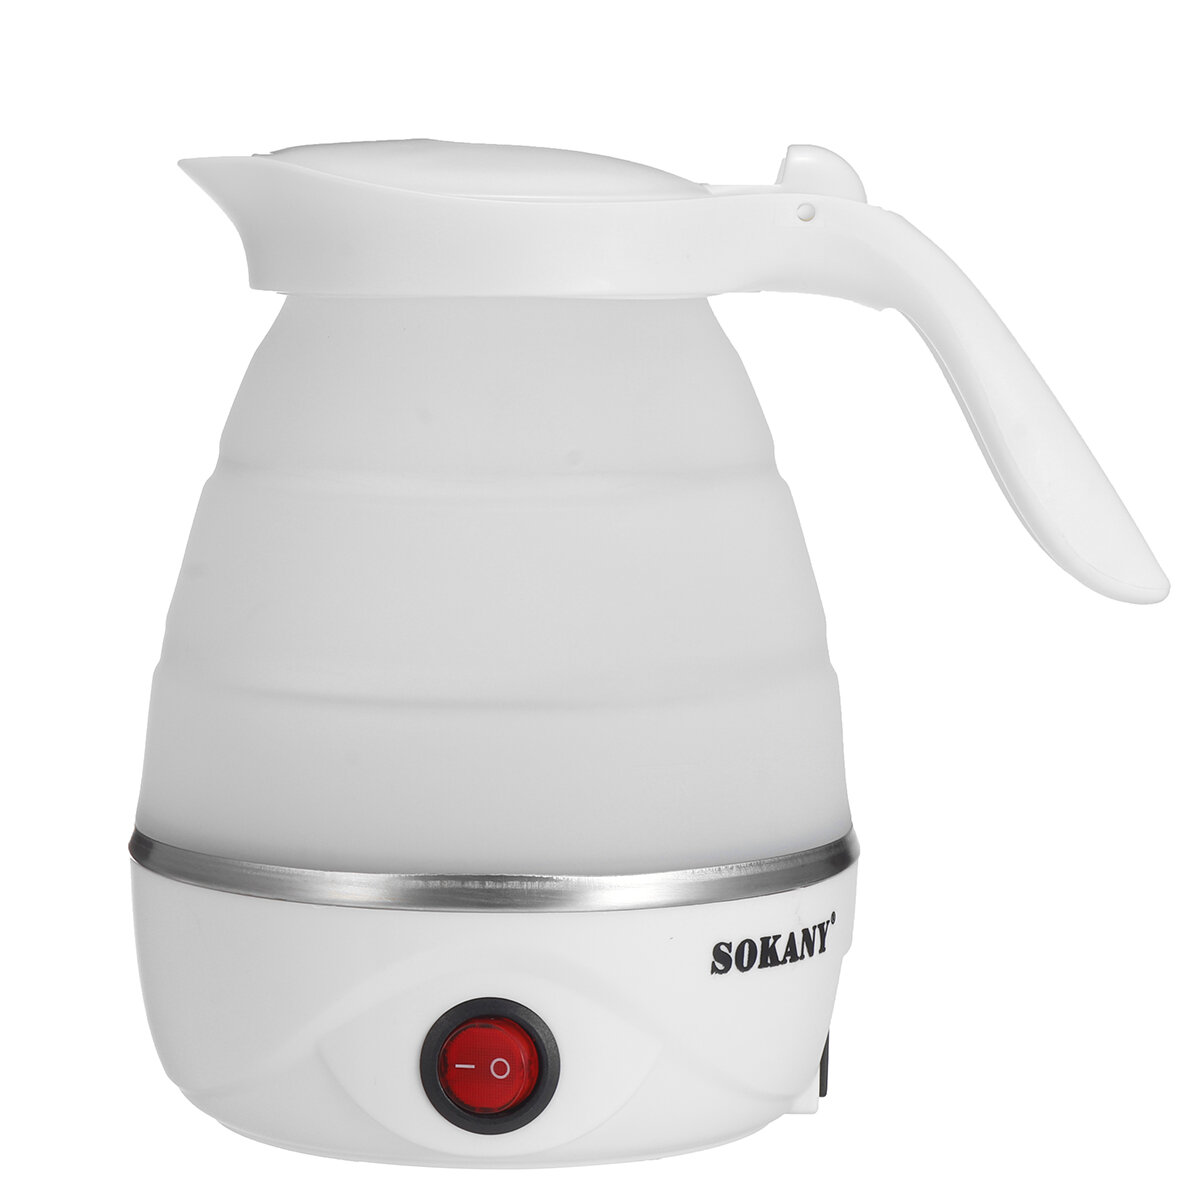 SOKANY 600W 700ml Compact Electric Kettle Silicone Foldable Portable Travel Hot Water Heating Boiler Tea Boiling Pot Home Use